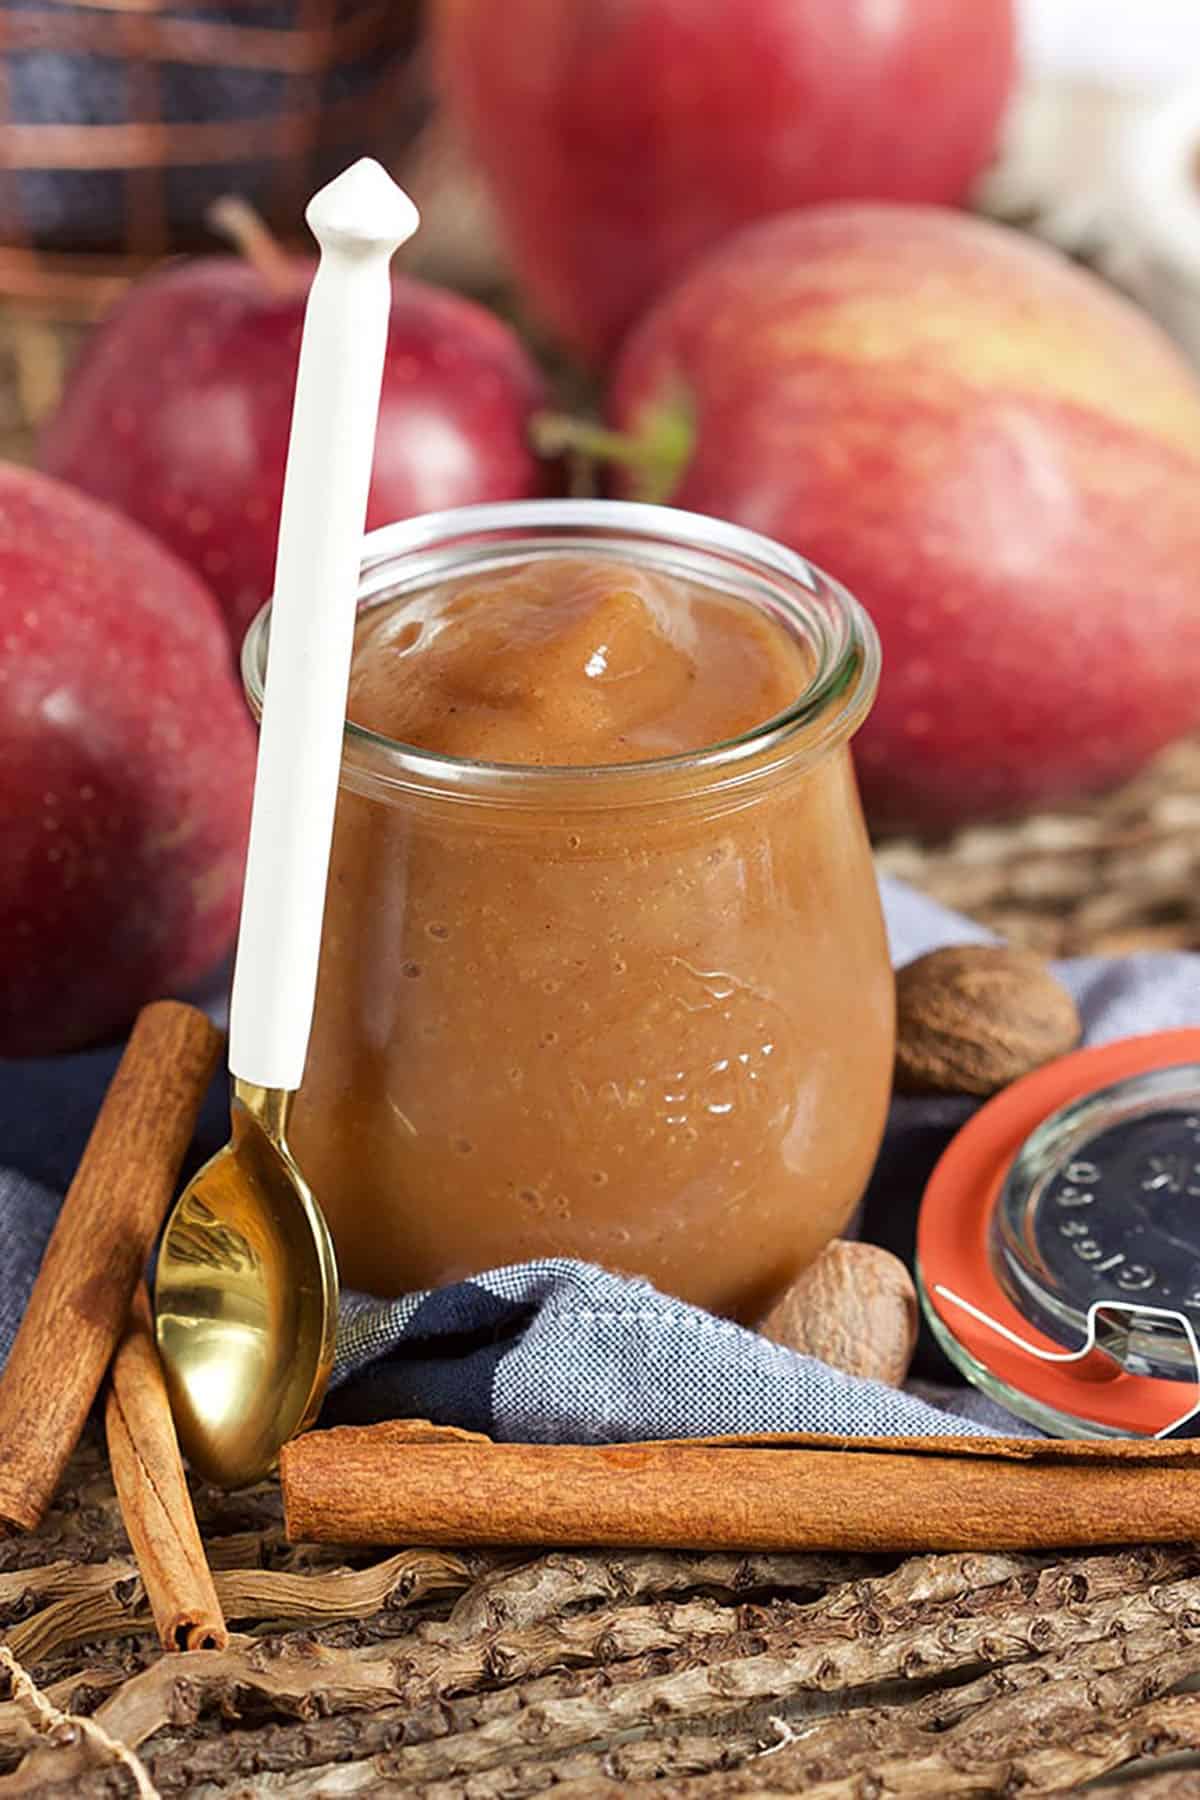 Apple Butter in a jar with a white spoon propped up against the side and apples in the background.